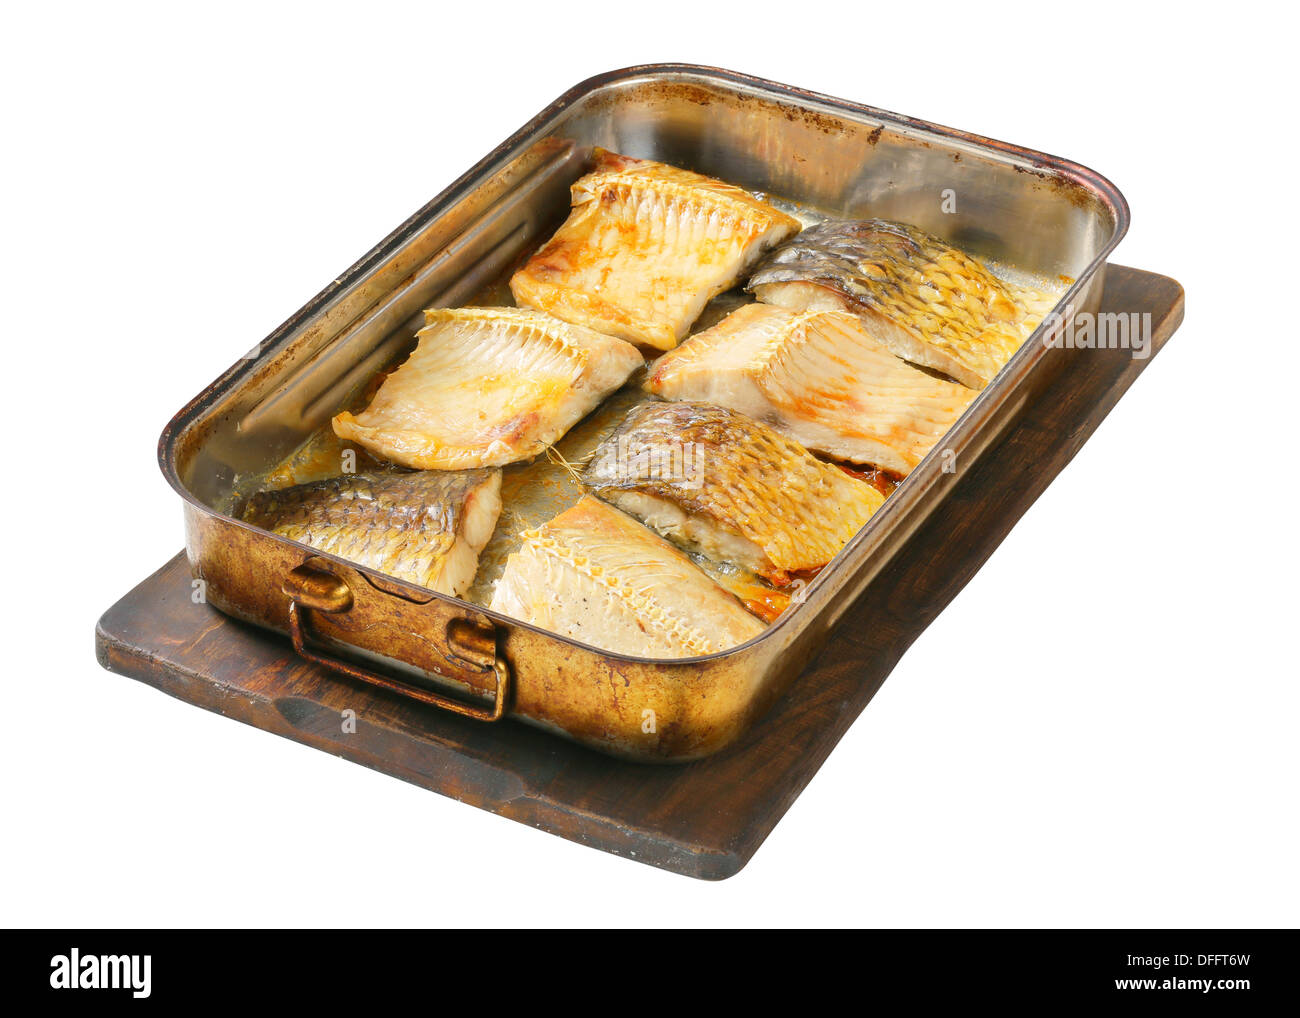 Oven baked carp fillets in baking pan Stock Photo